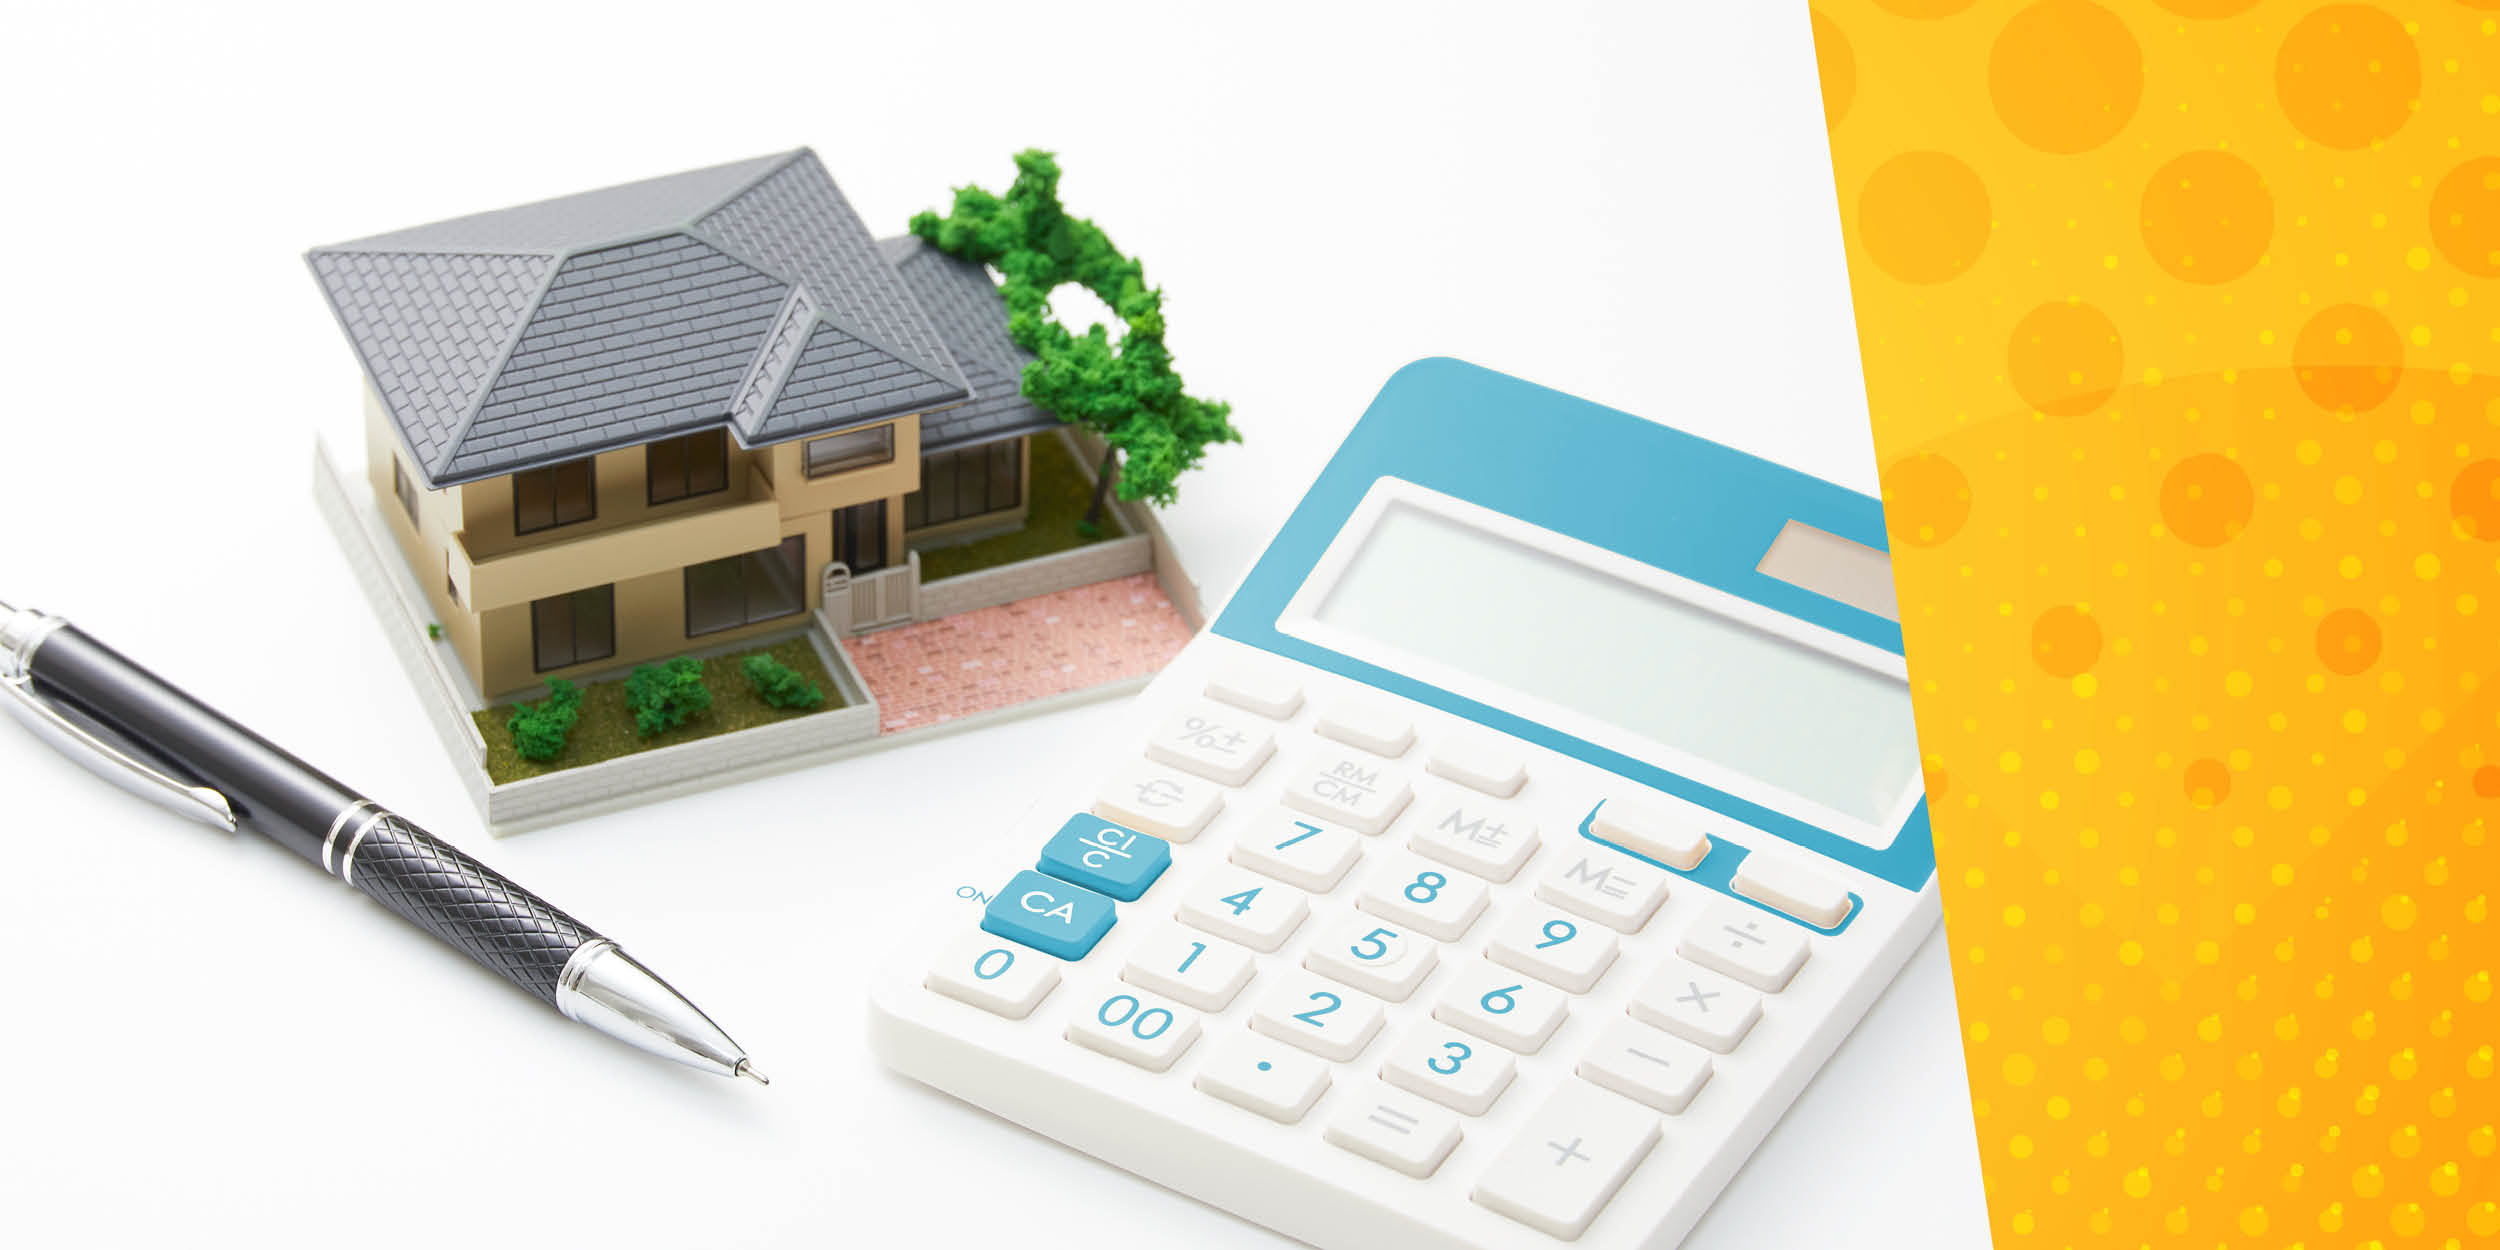 Miniature model house, calculator and pen with yellow spotted background